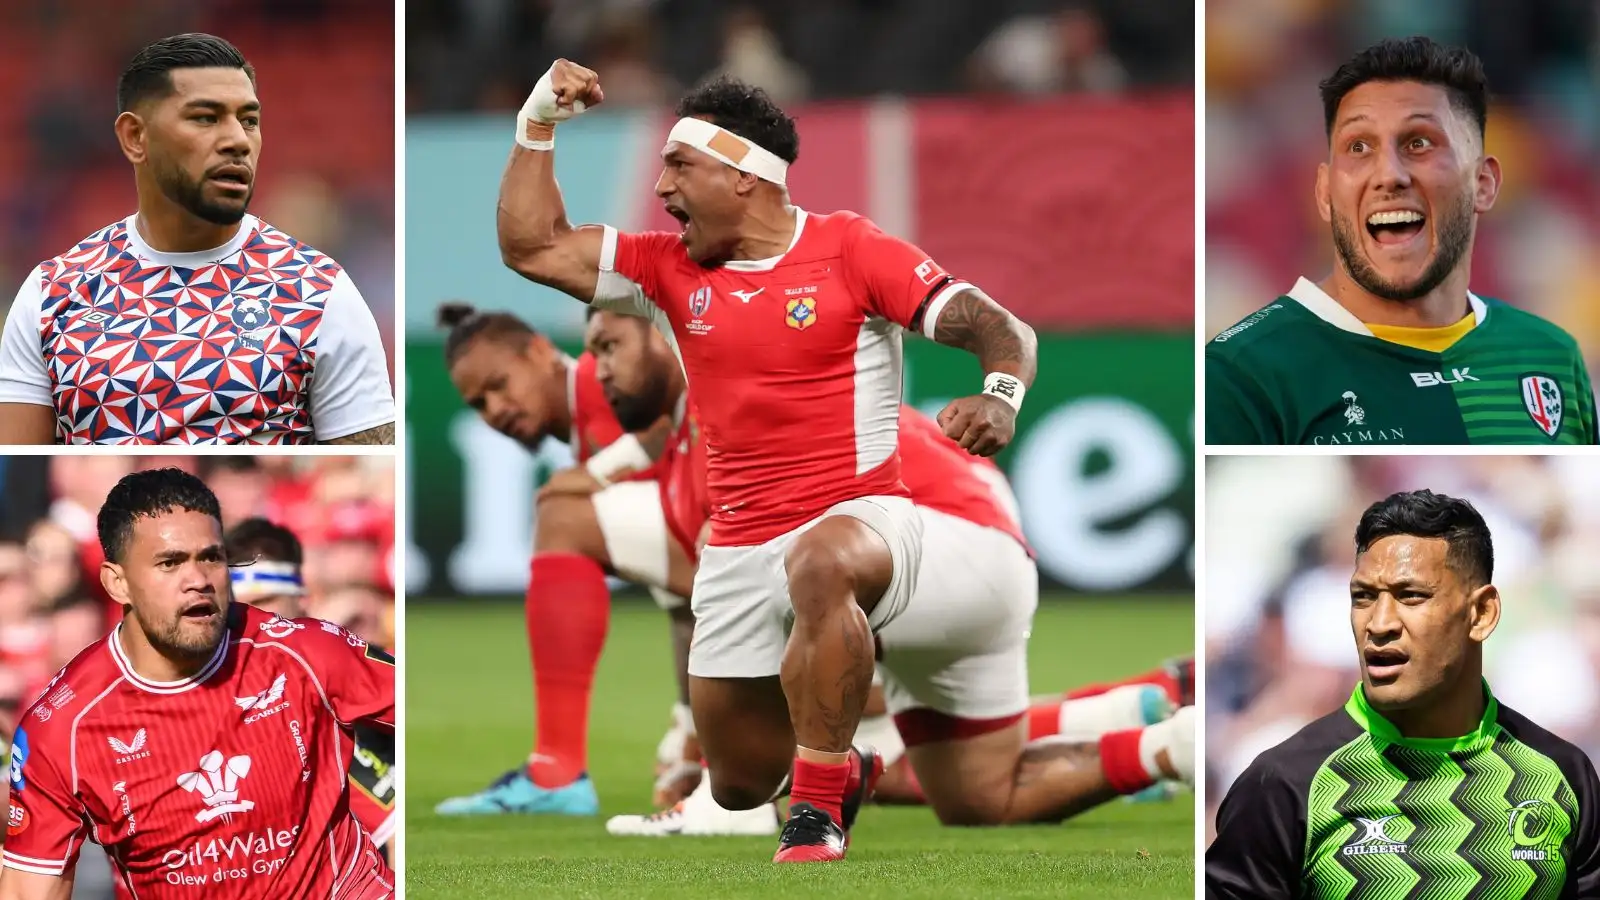 We take a look at how Tonga could line up during the Rugby World Cup with the likes of Israel Folau, Charles Piutau and Malakai Fekitoa in their squad.